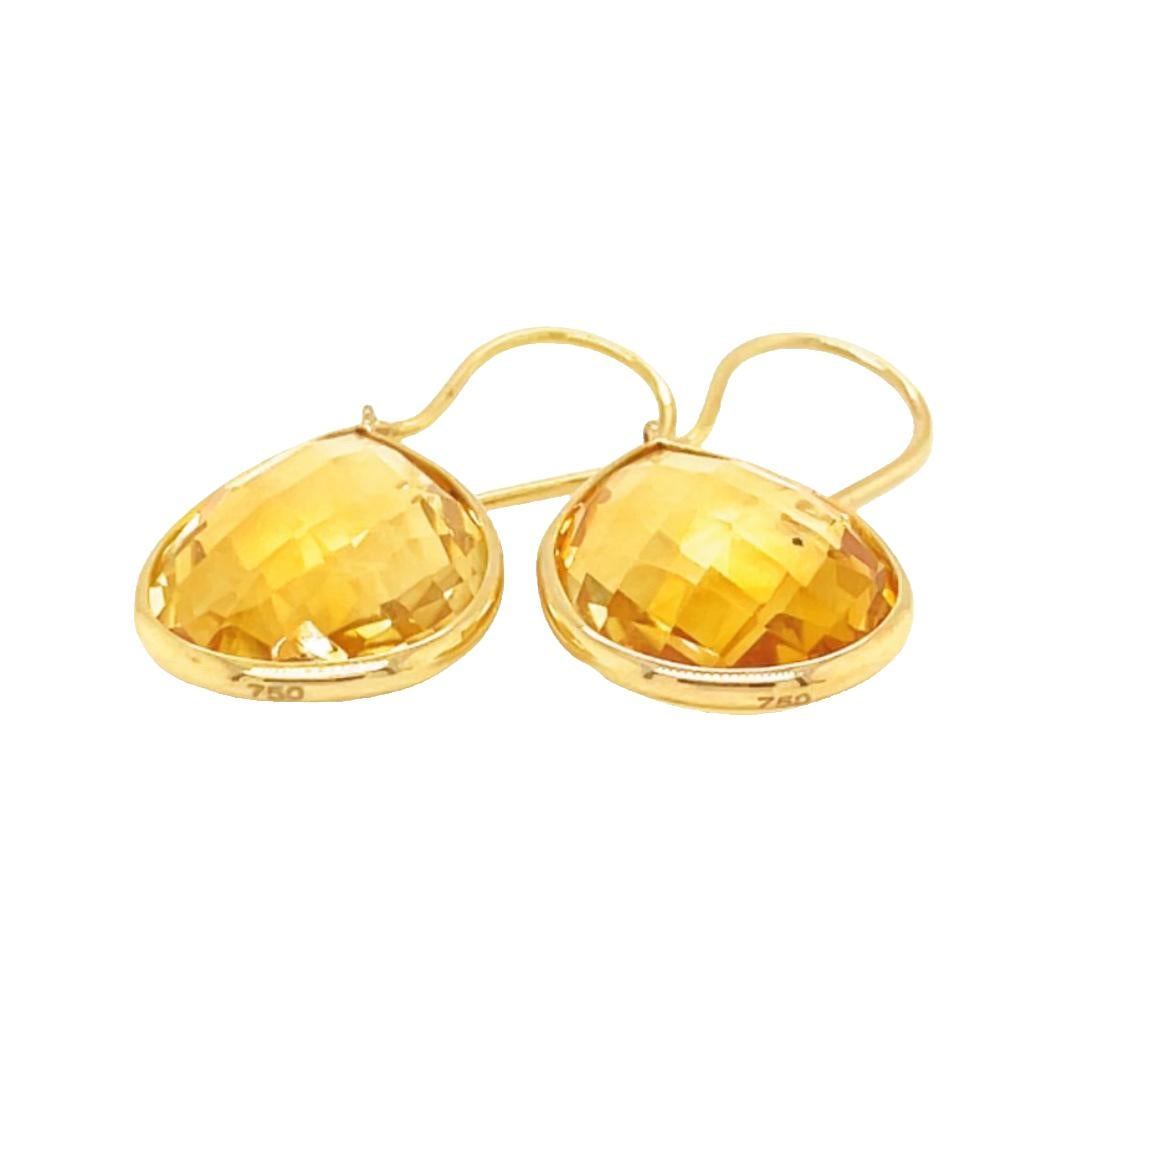 Nari Fine Jewels Handcrafted Teardrop Earrings with Citrine in 18k Yellow In New Condition For Sale In beverly hills, CA